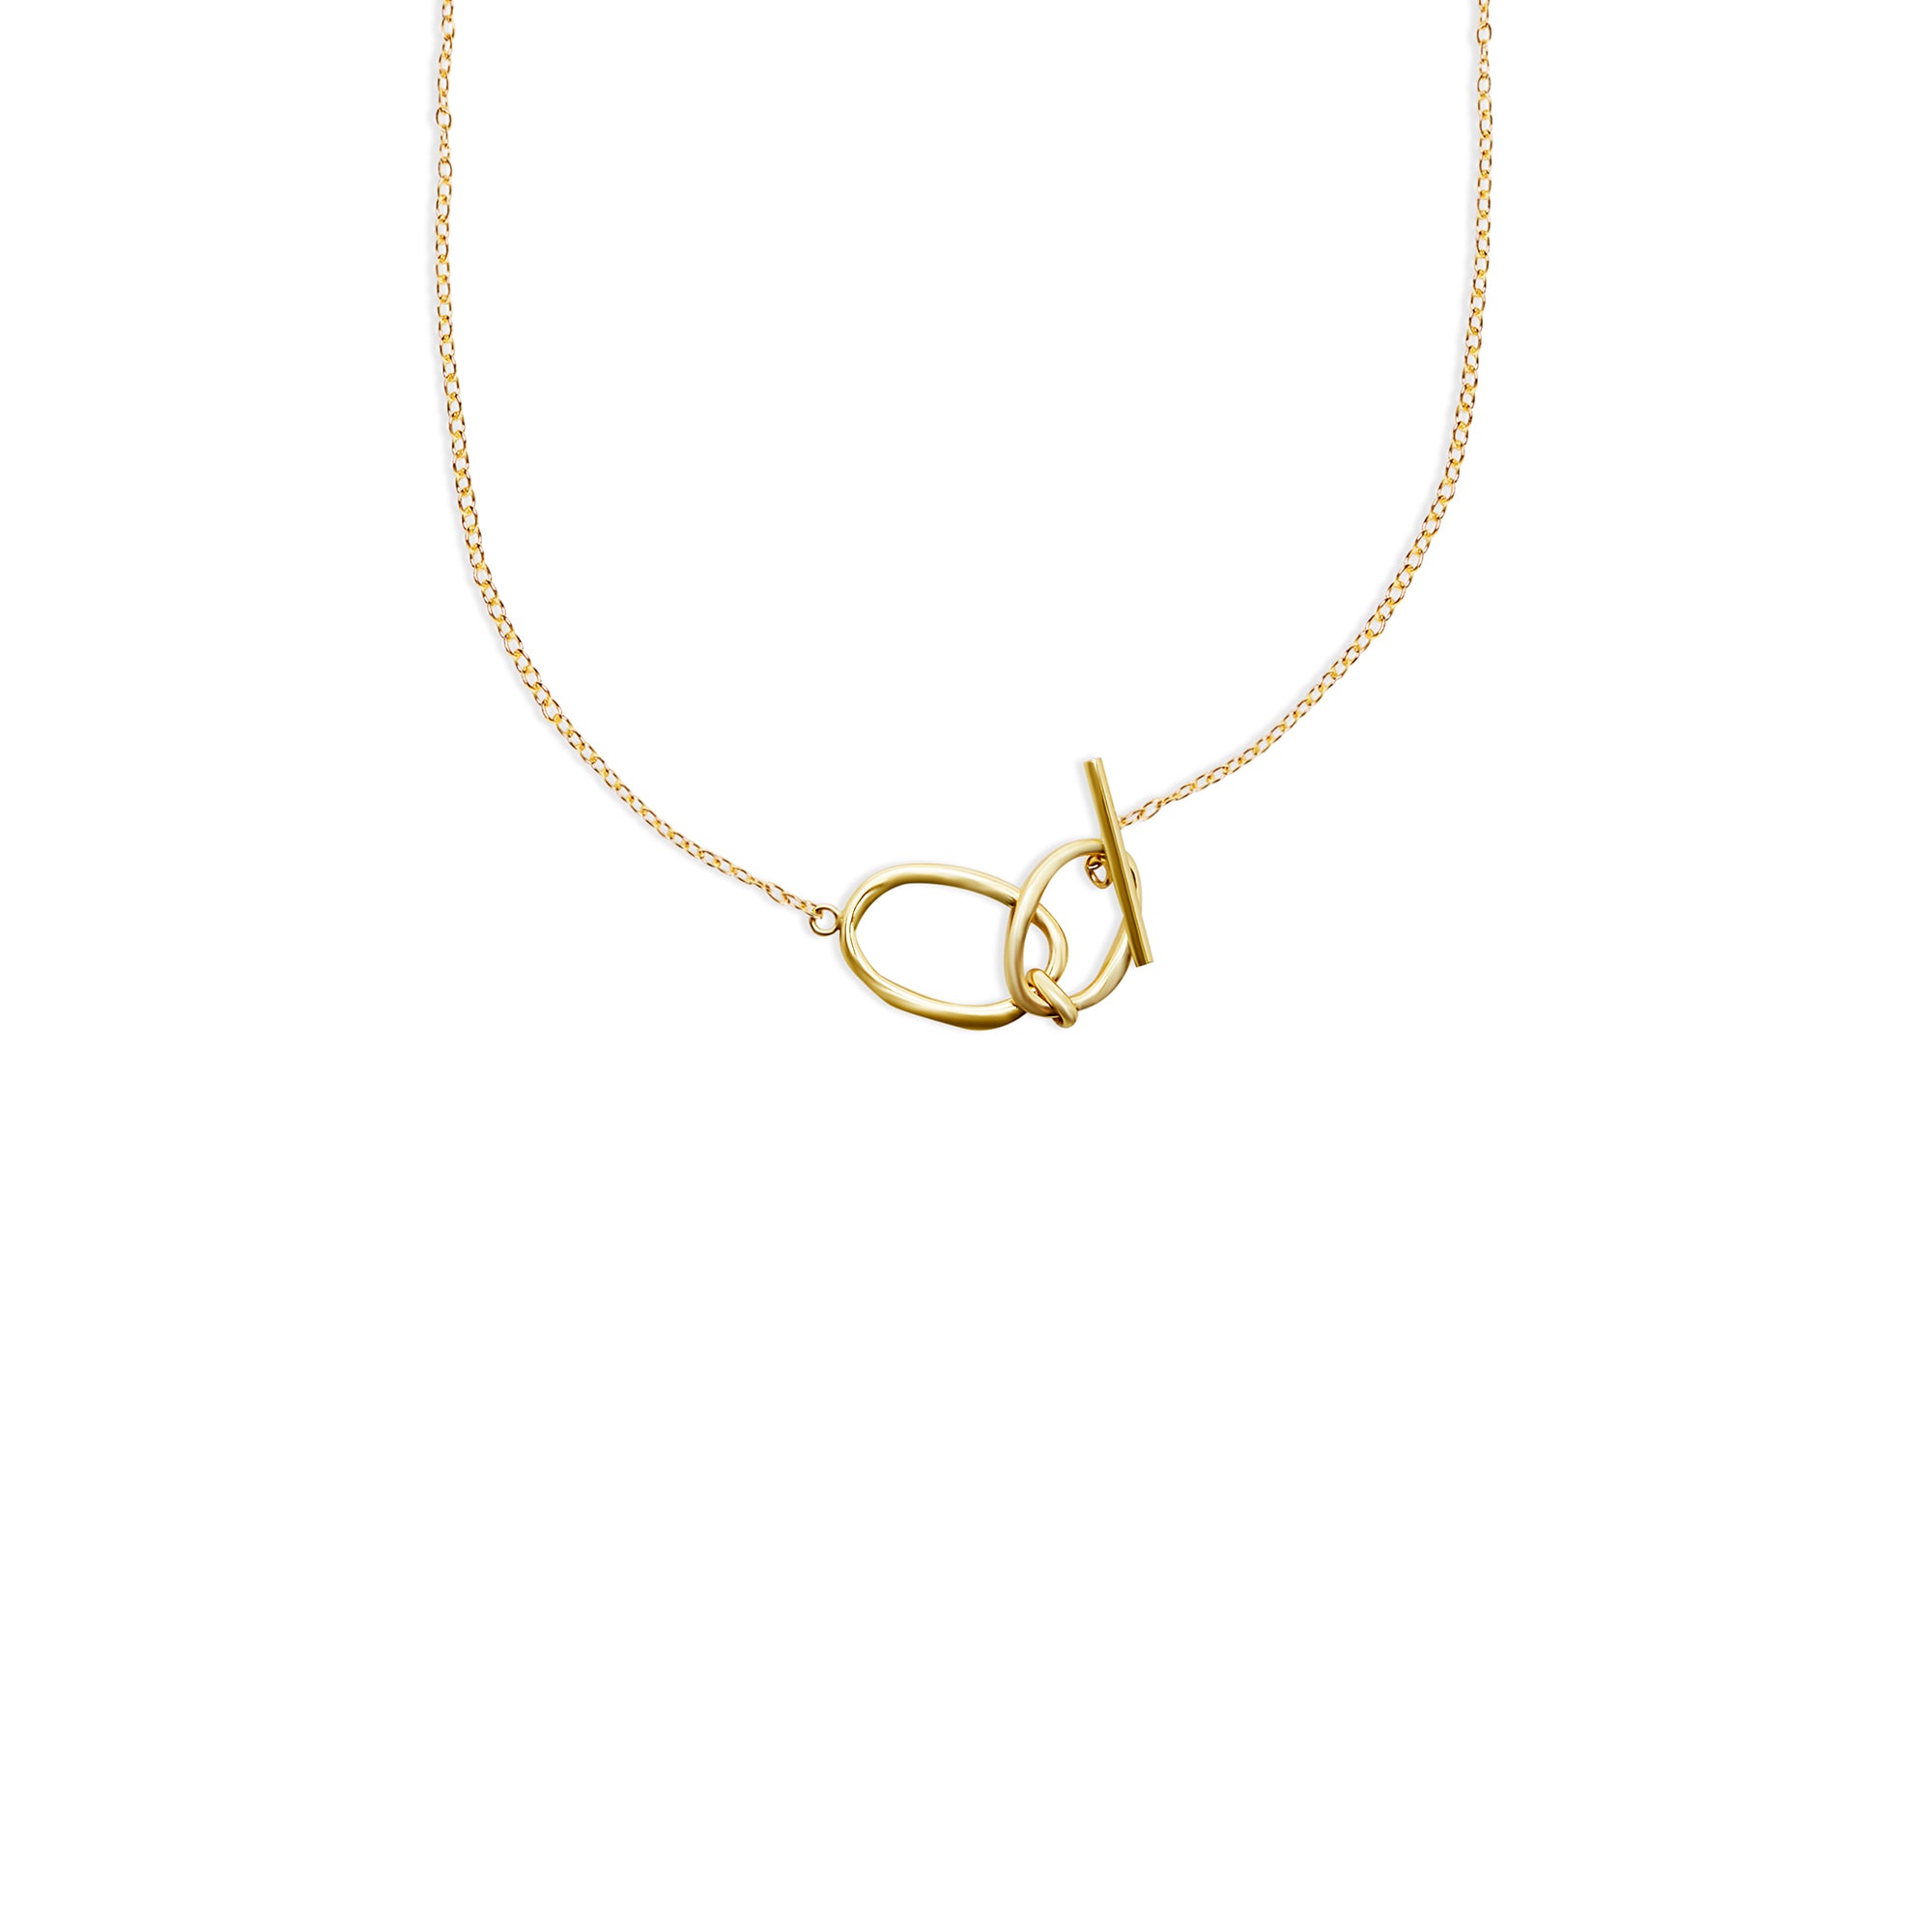 THE SIA TOGGLE NECKLACE